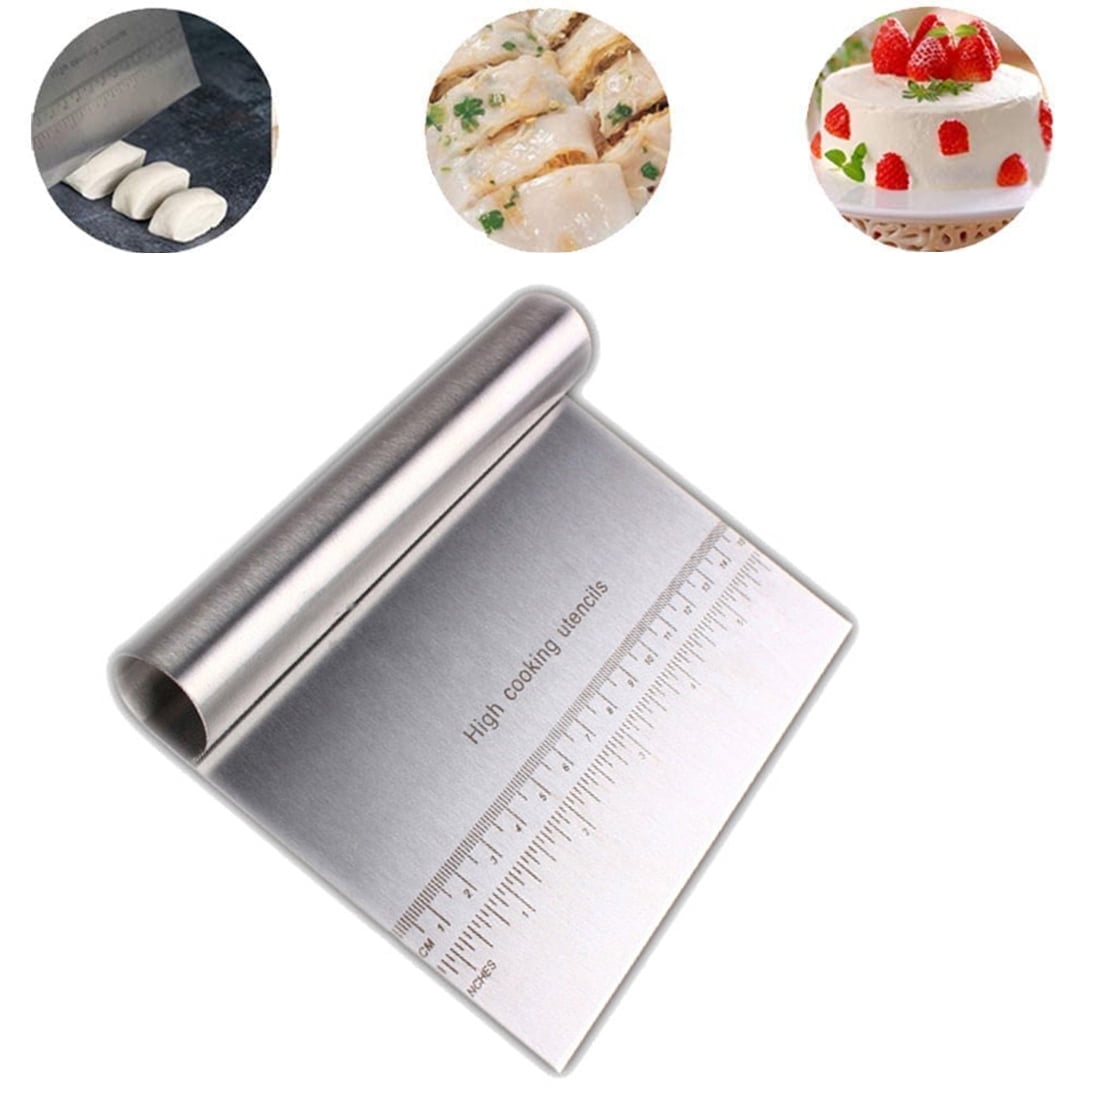 INTBUYING Durable Pizza Dough Scraper Cutter Flour Pastry Cake Tool Gadget  Stainless Steel